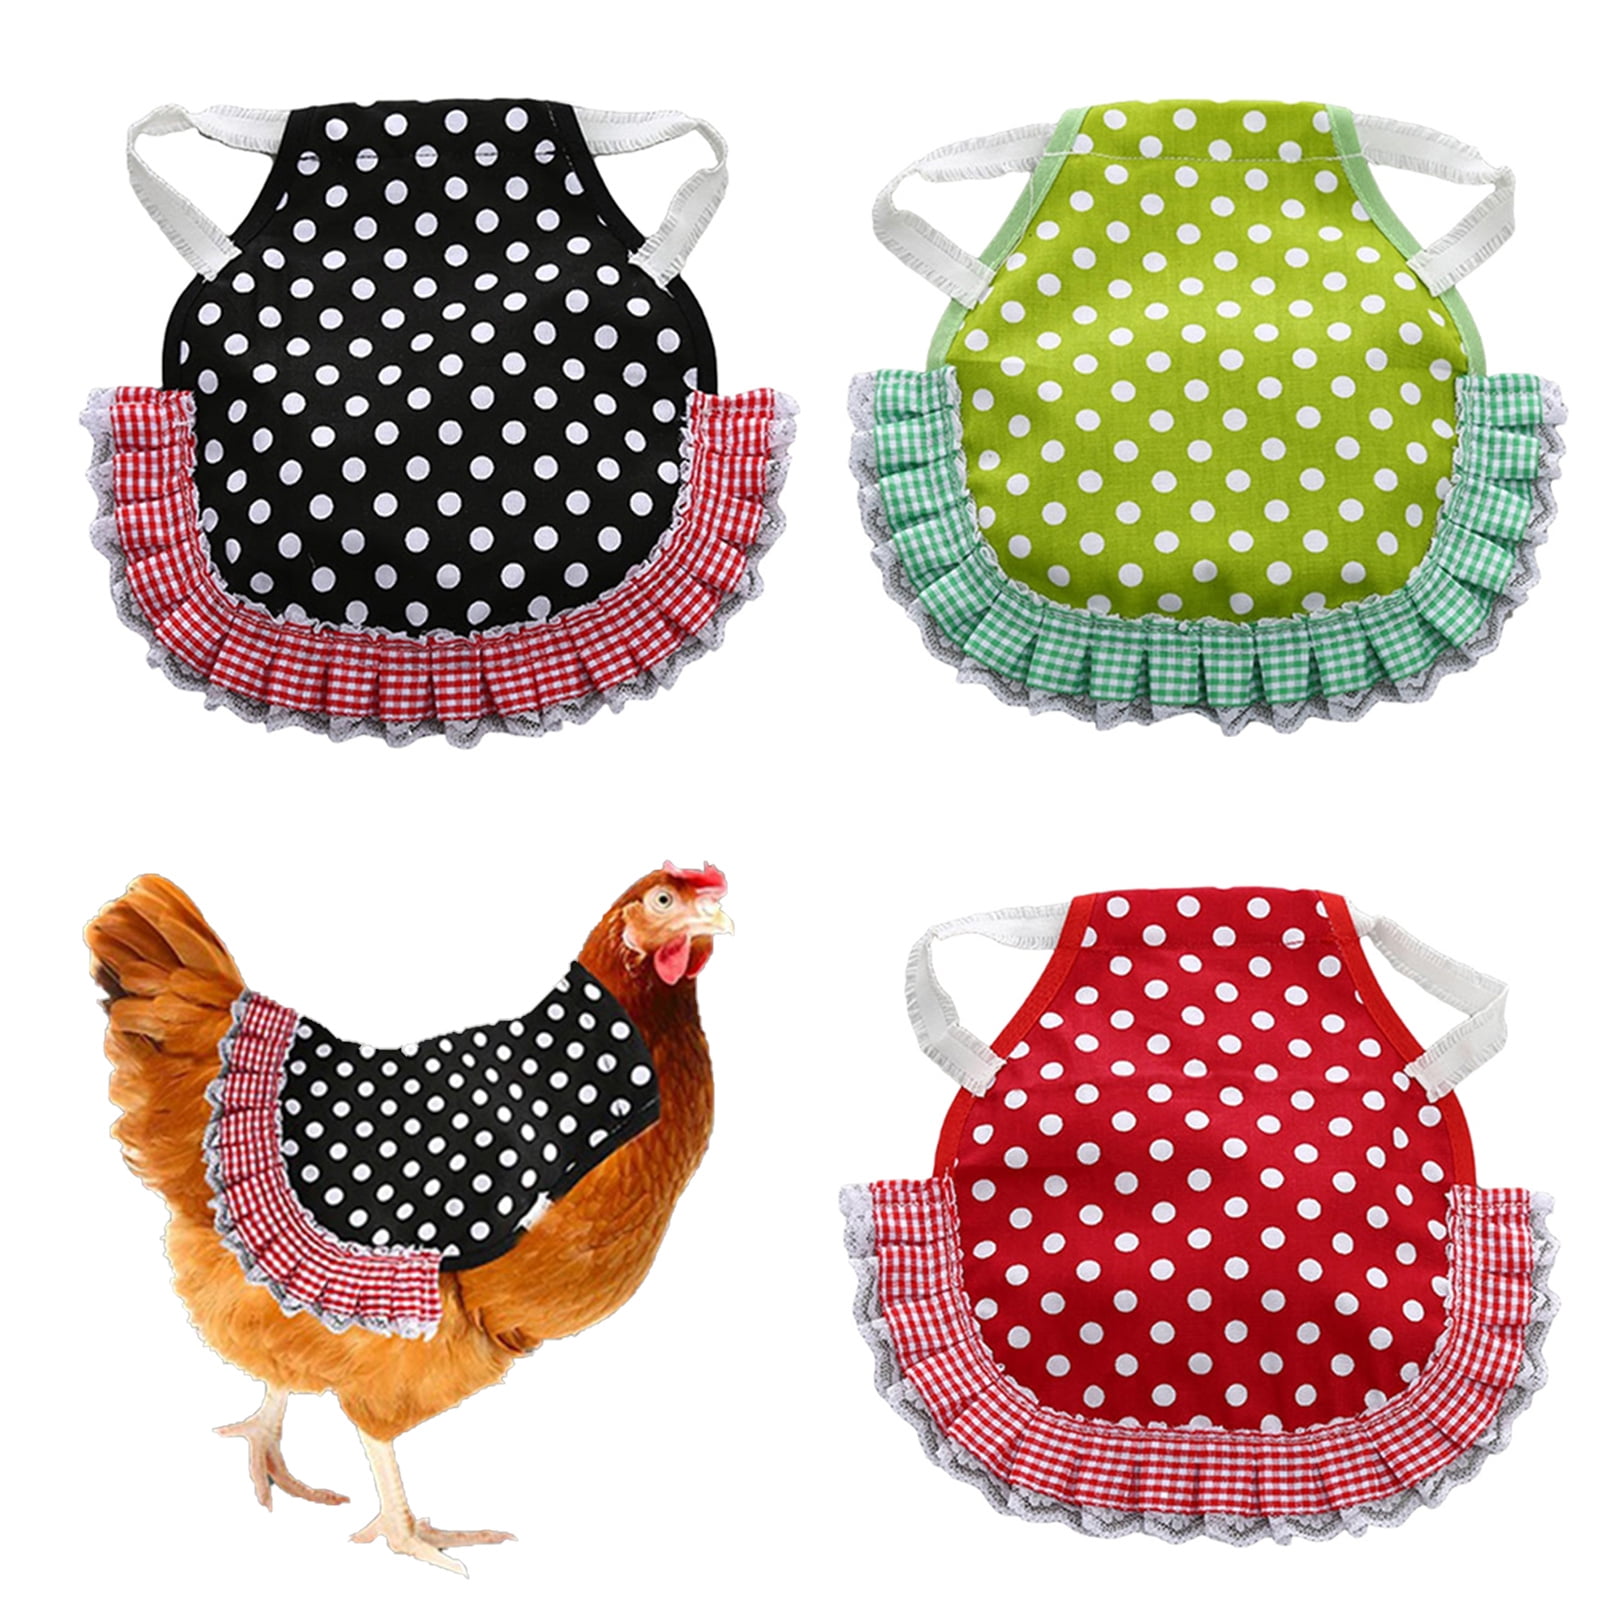 6 SUPER WIDE w TAIL FEATHER PROTECTION Chicken Saddle Hen Apron POULTRY PRODUCTS 